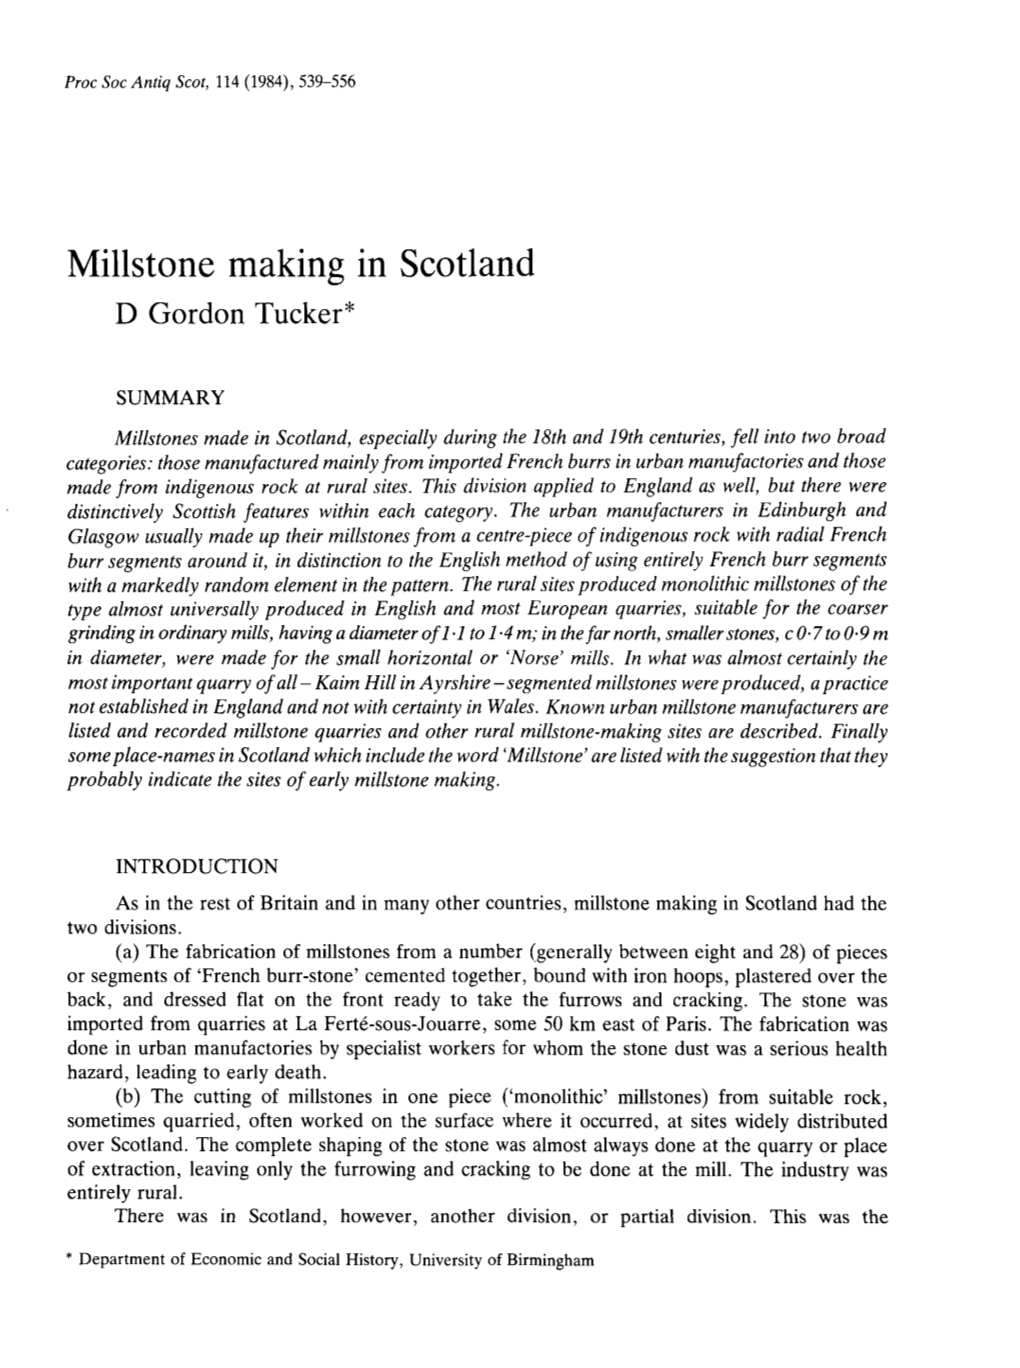 Millstone Making in Scotland Had the Divisionso Tw